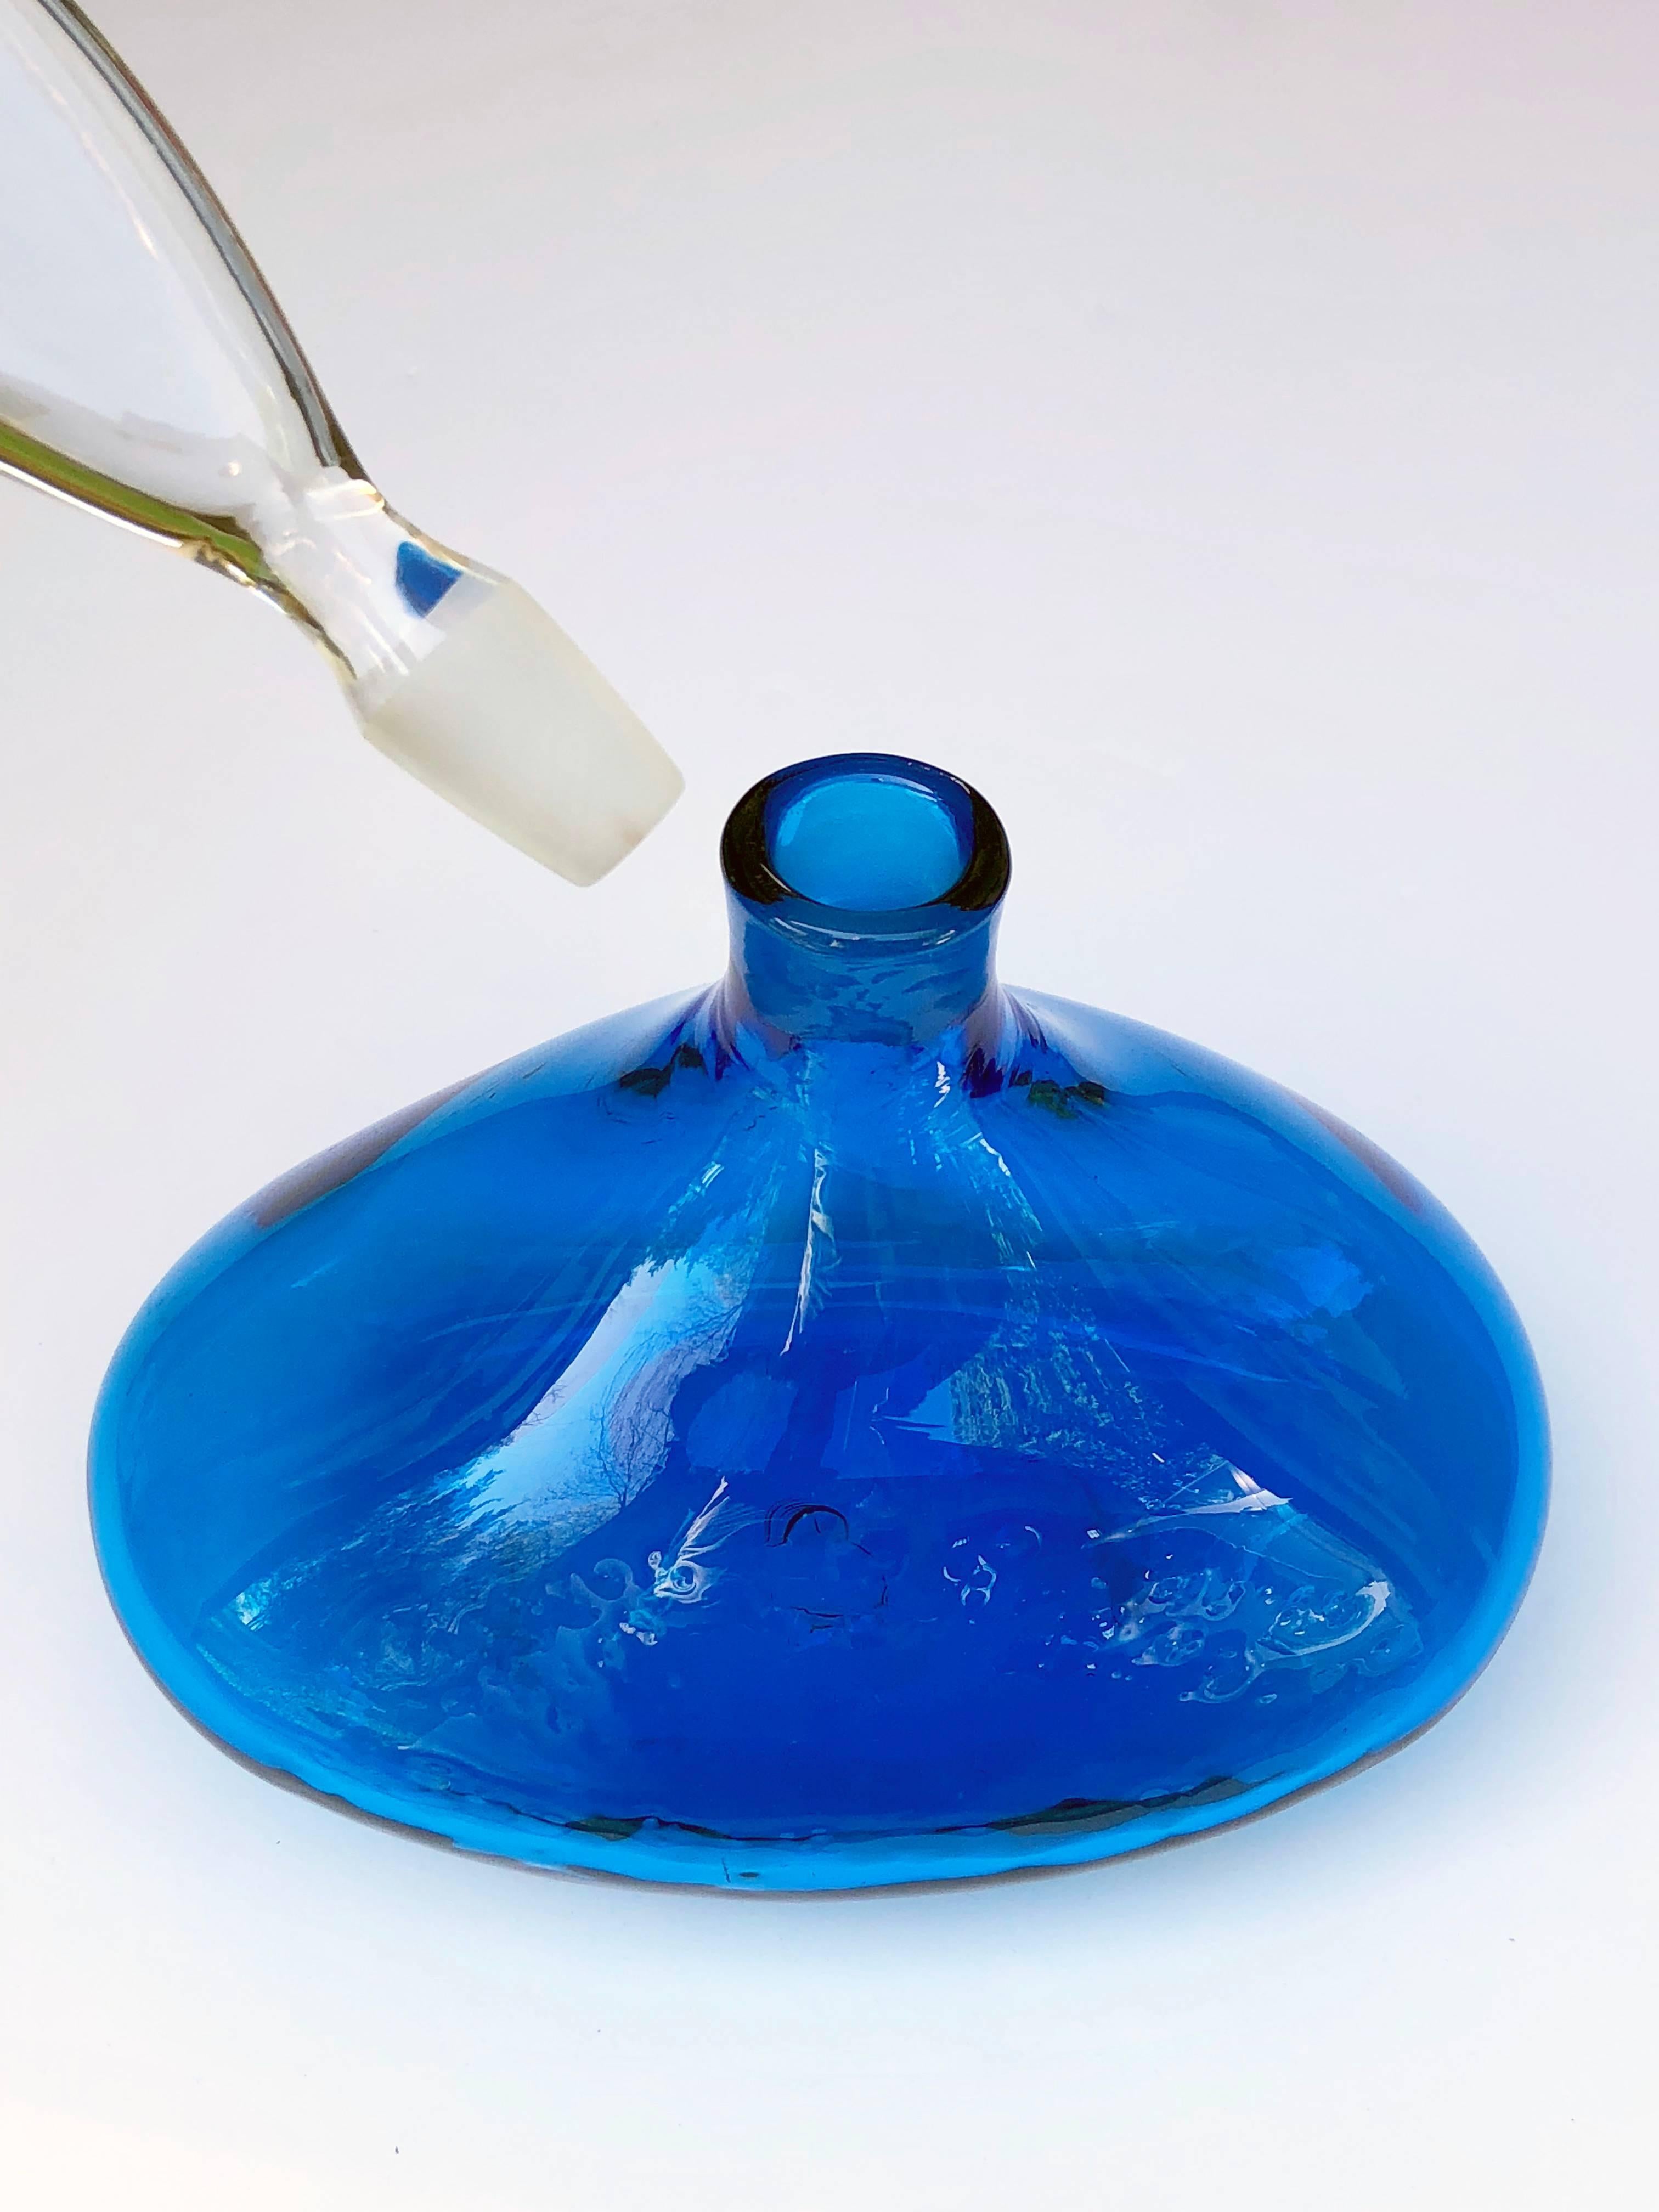 A vibrant American 1960s blue glass ships decanter with over-scaled stopper, by Blenko glassworks, the very cool decanter with large clear glass paddle-form stopper resting on a vibrant blue base.